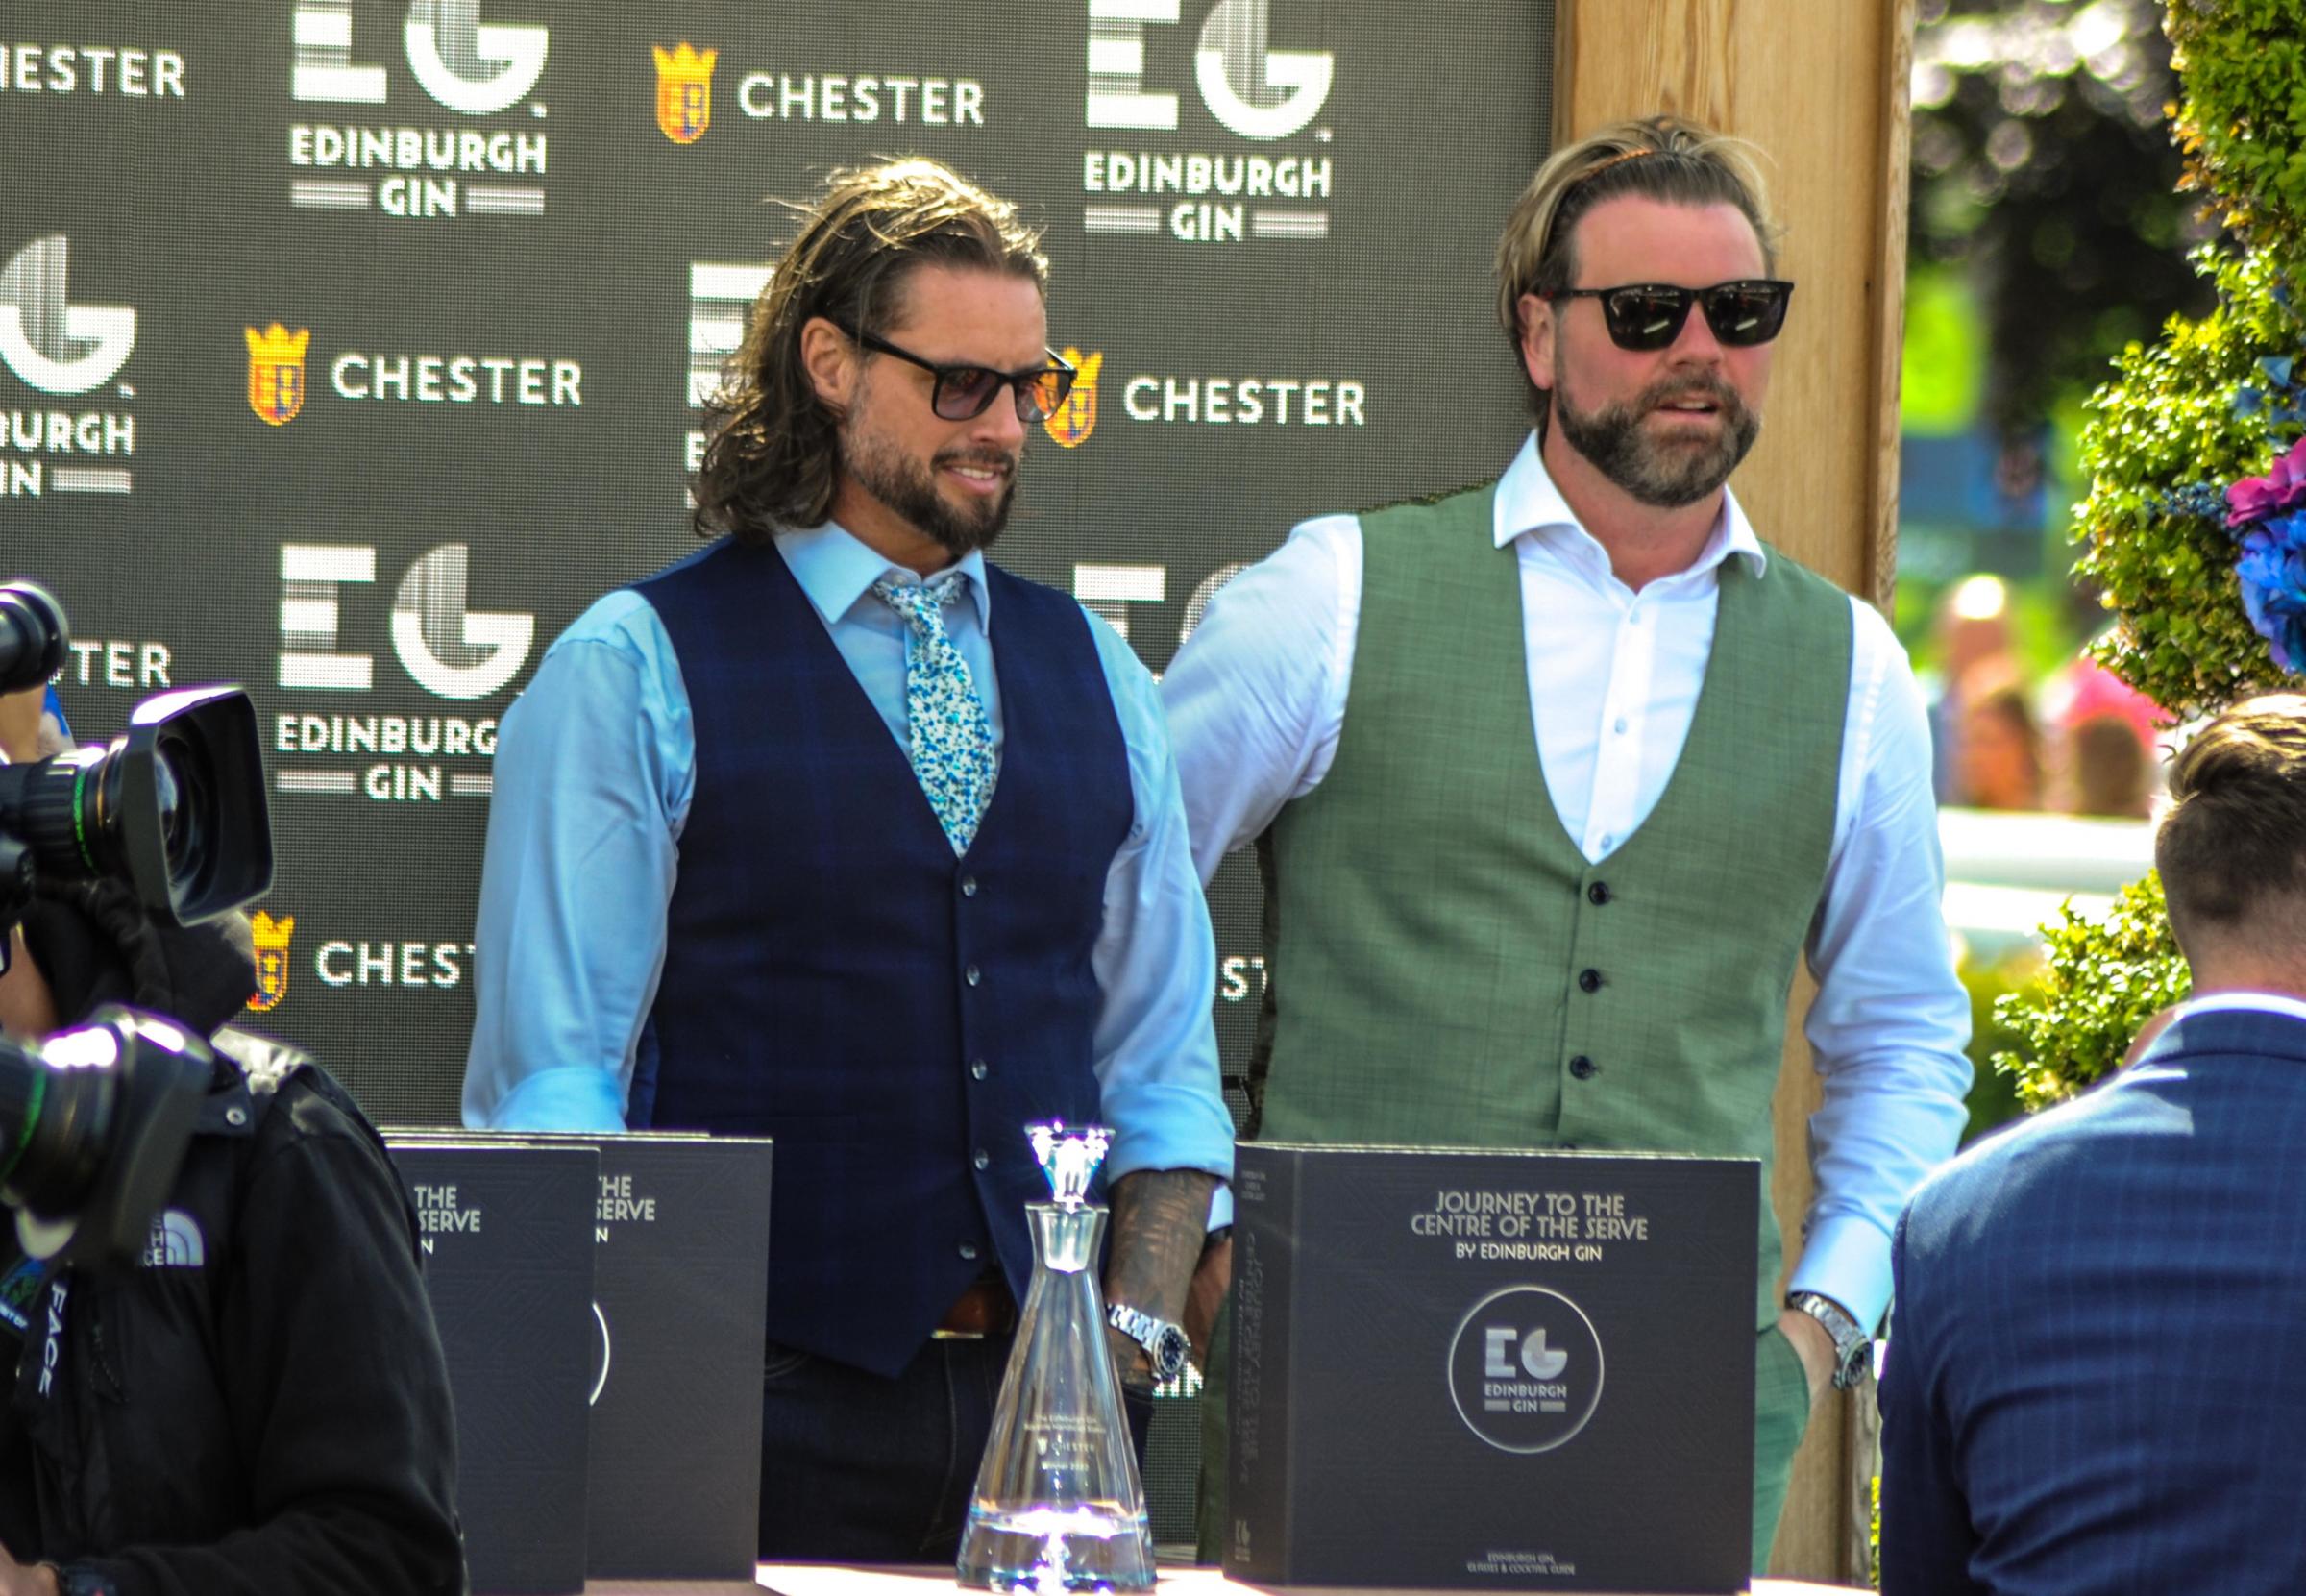 Chester Racecourse, Edinburgh Gin Summer Saturday. Picture Former Boyzone and Westlife stars Keith Duffy and Brian McFadden. All pictures: Simon Warburton.